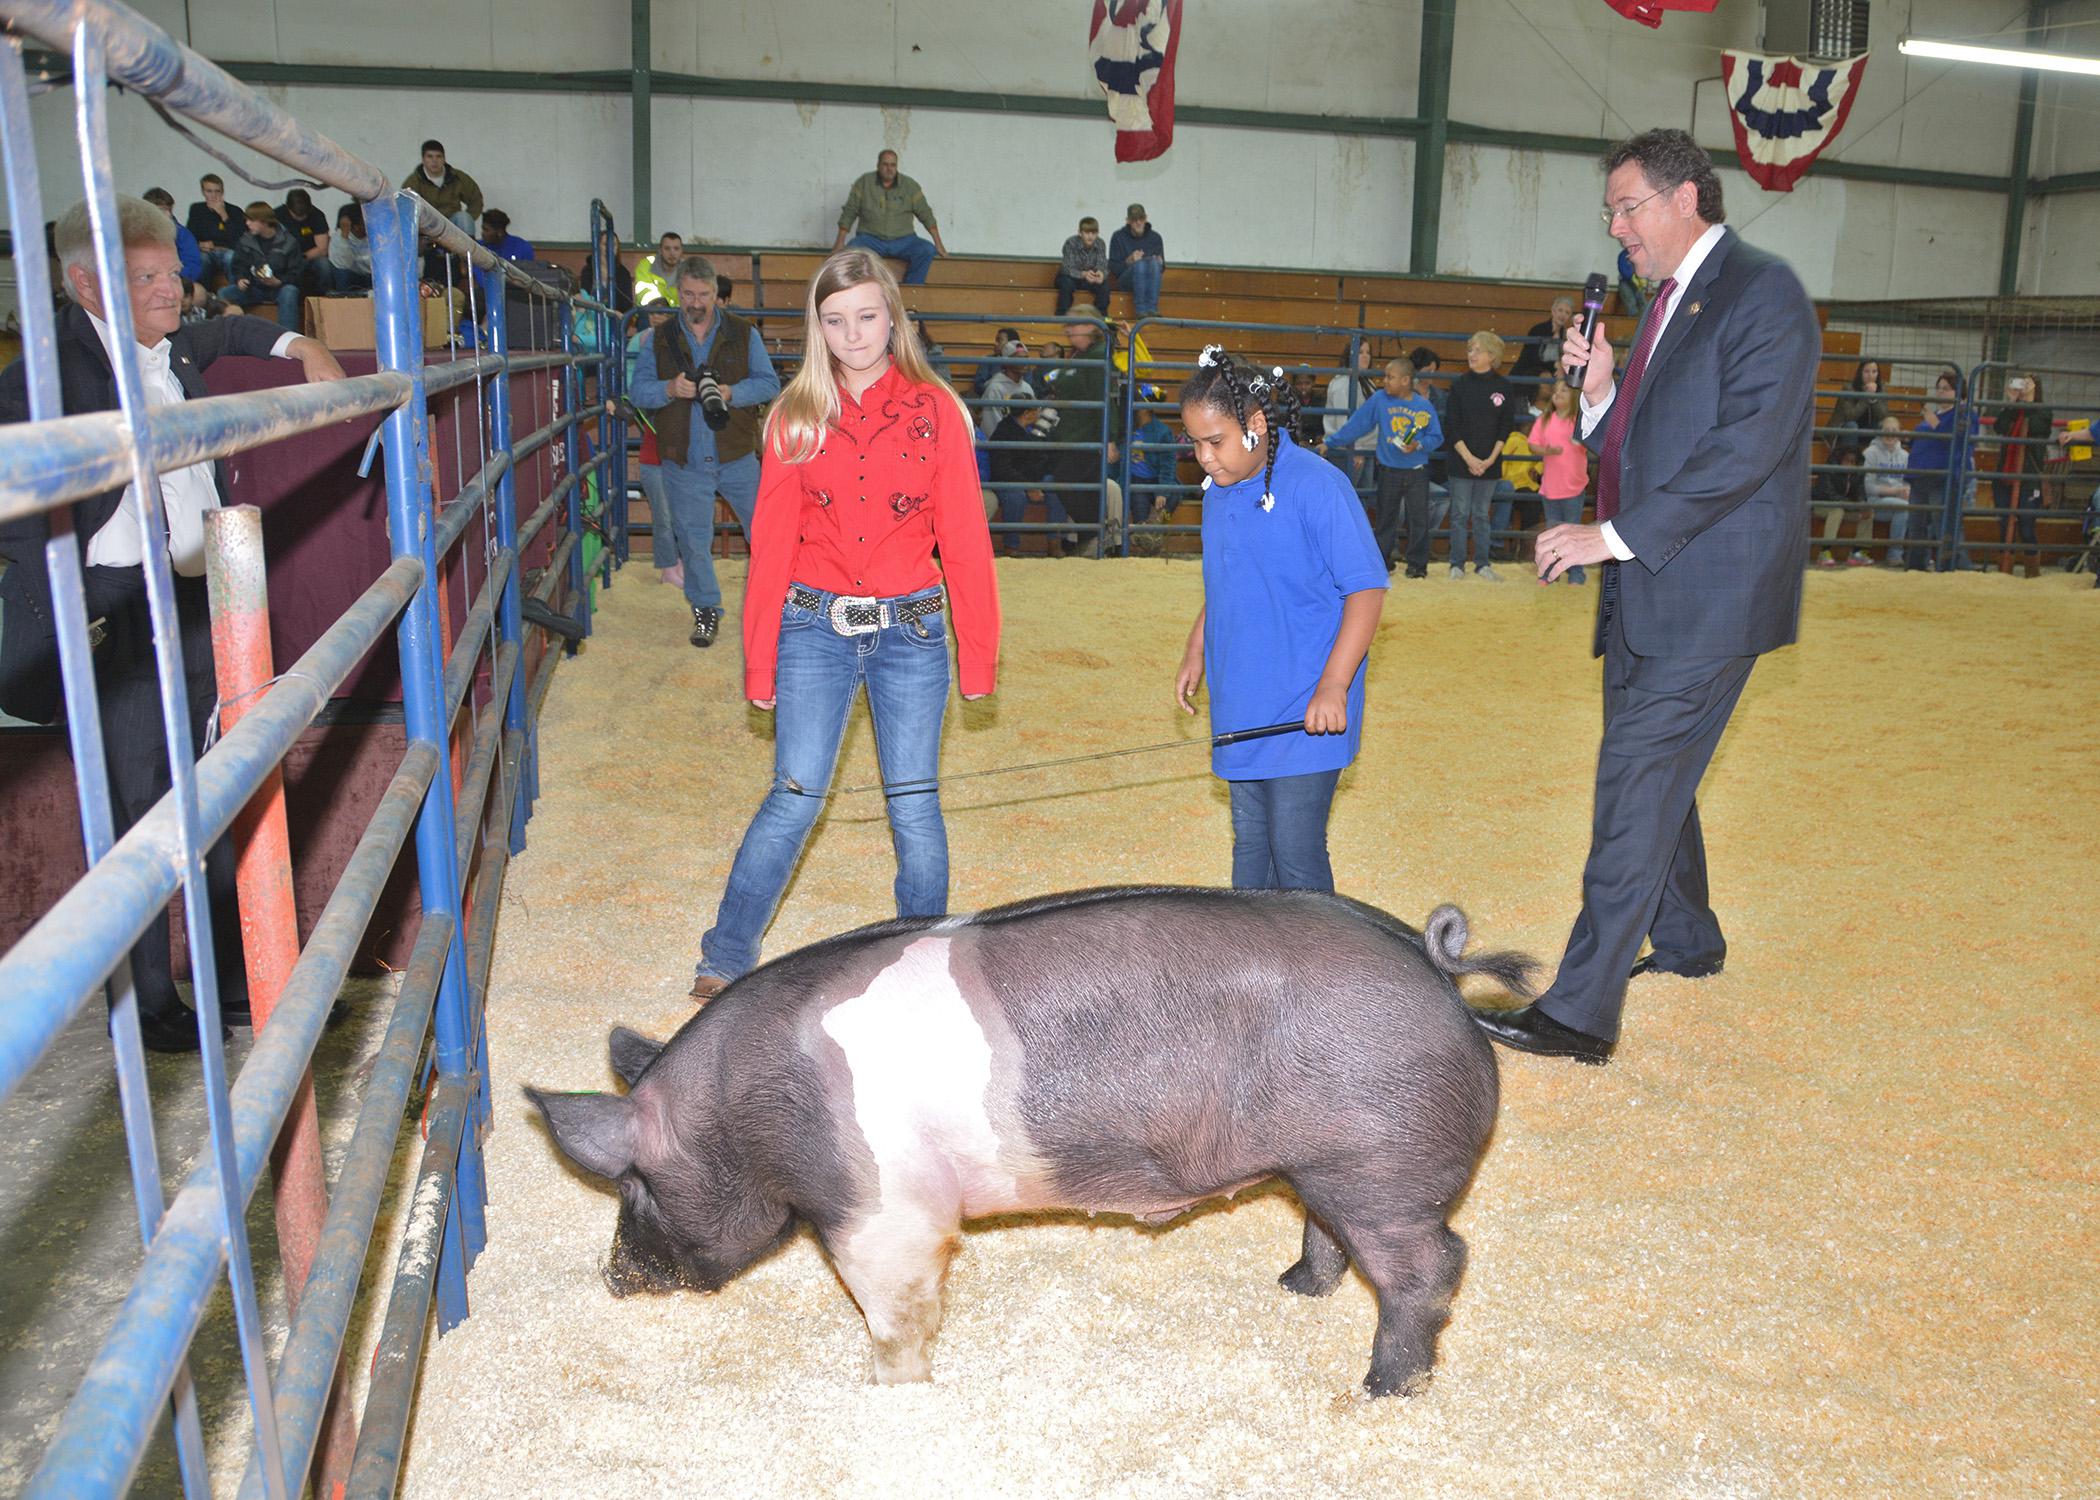 Alexis Pickens, center, maneuvers a hog in the Clarke County Special Needs Livestock Show under the watchful eyes of 4-H member Brittany Conner on Jan. 23, 2015. U.S. Congressman Gregg Harper is reporting observations as he serves as the celebrity judge for the annual event in Quitman, Mississippi. (Photo by MSU Ag Communications/Linda Breazeale)